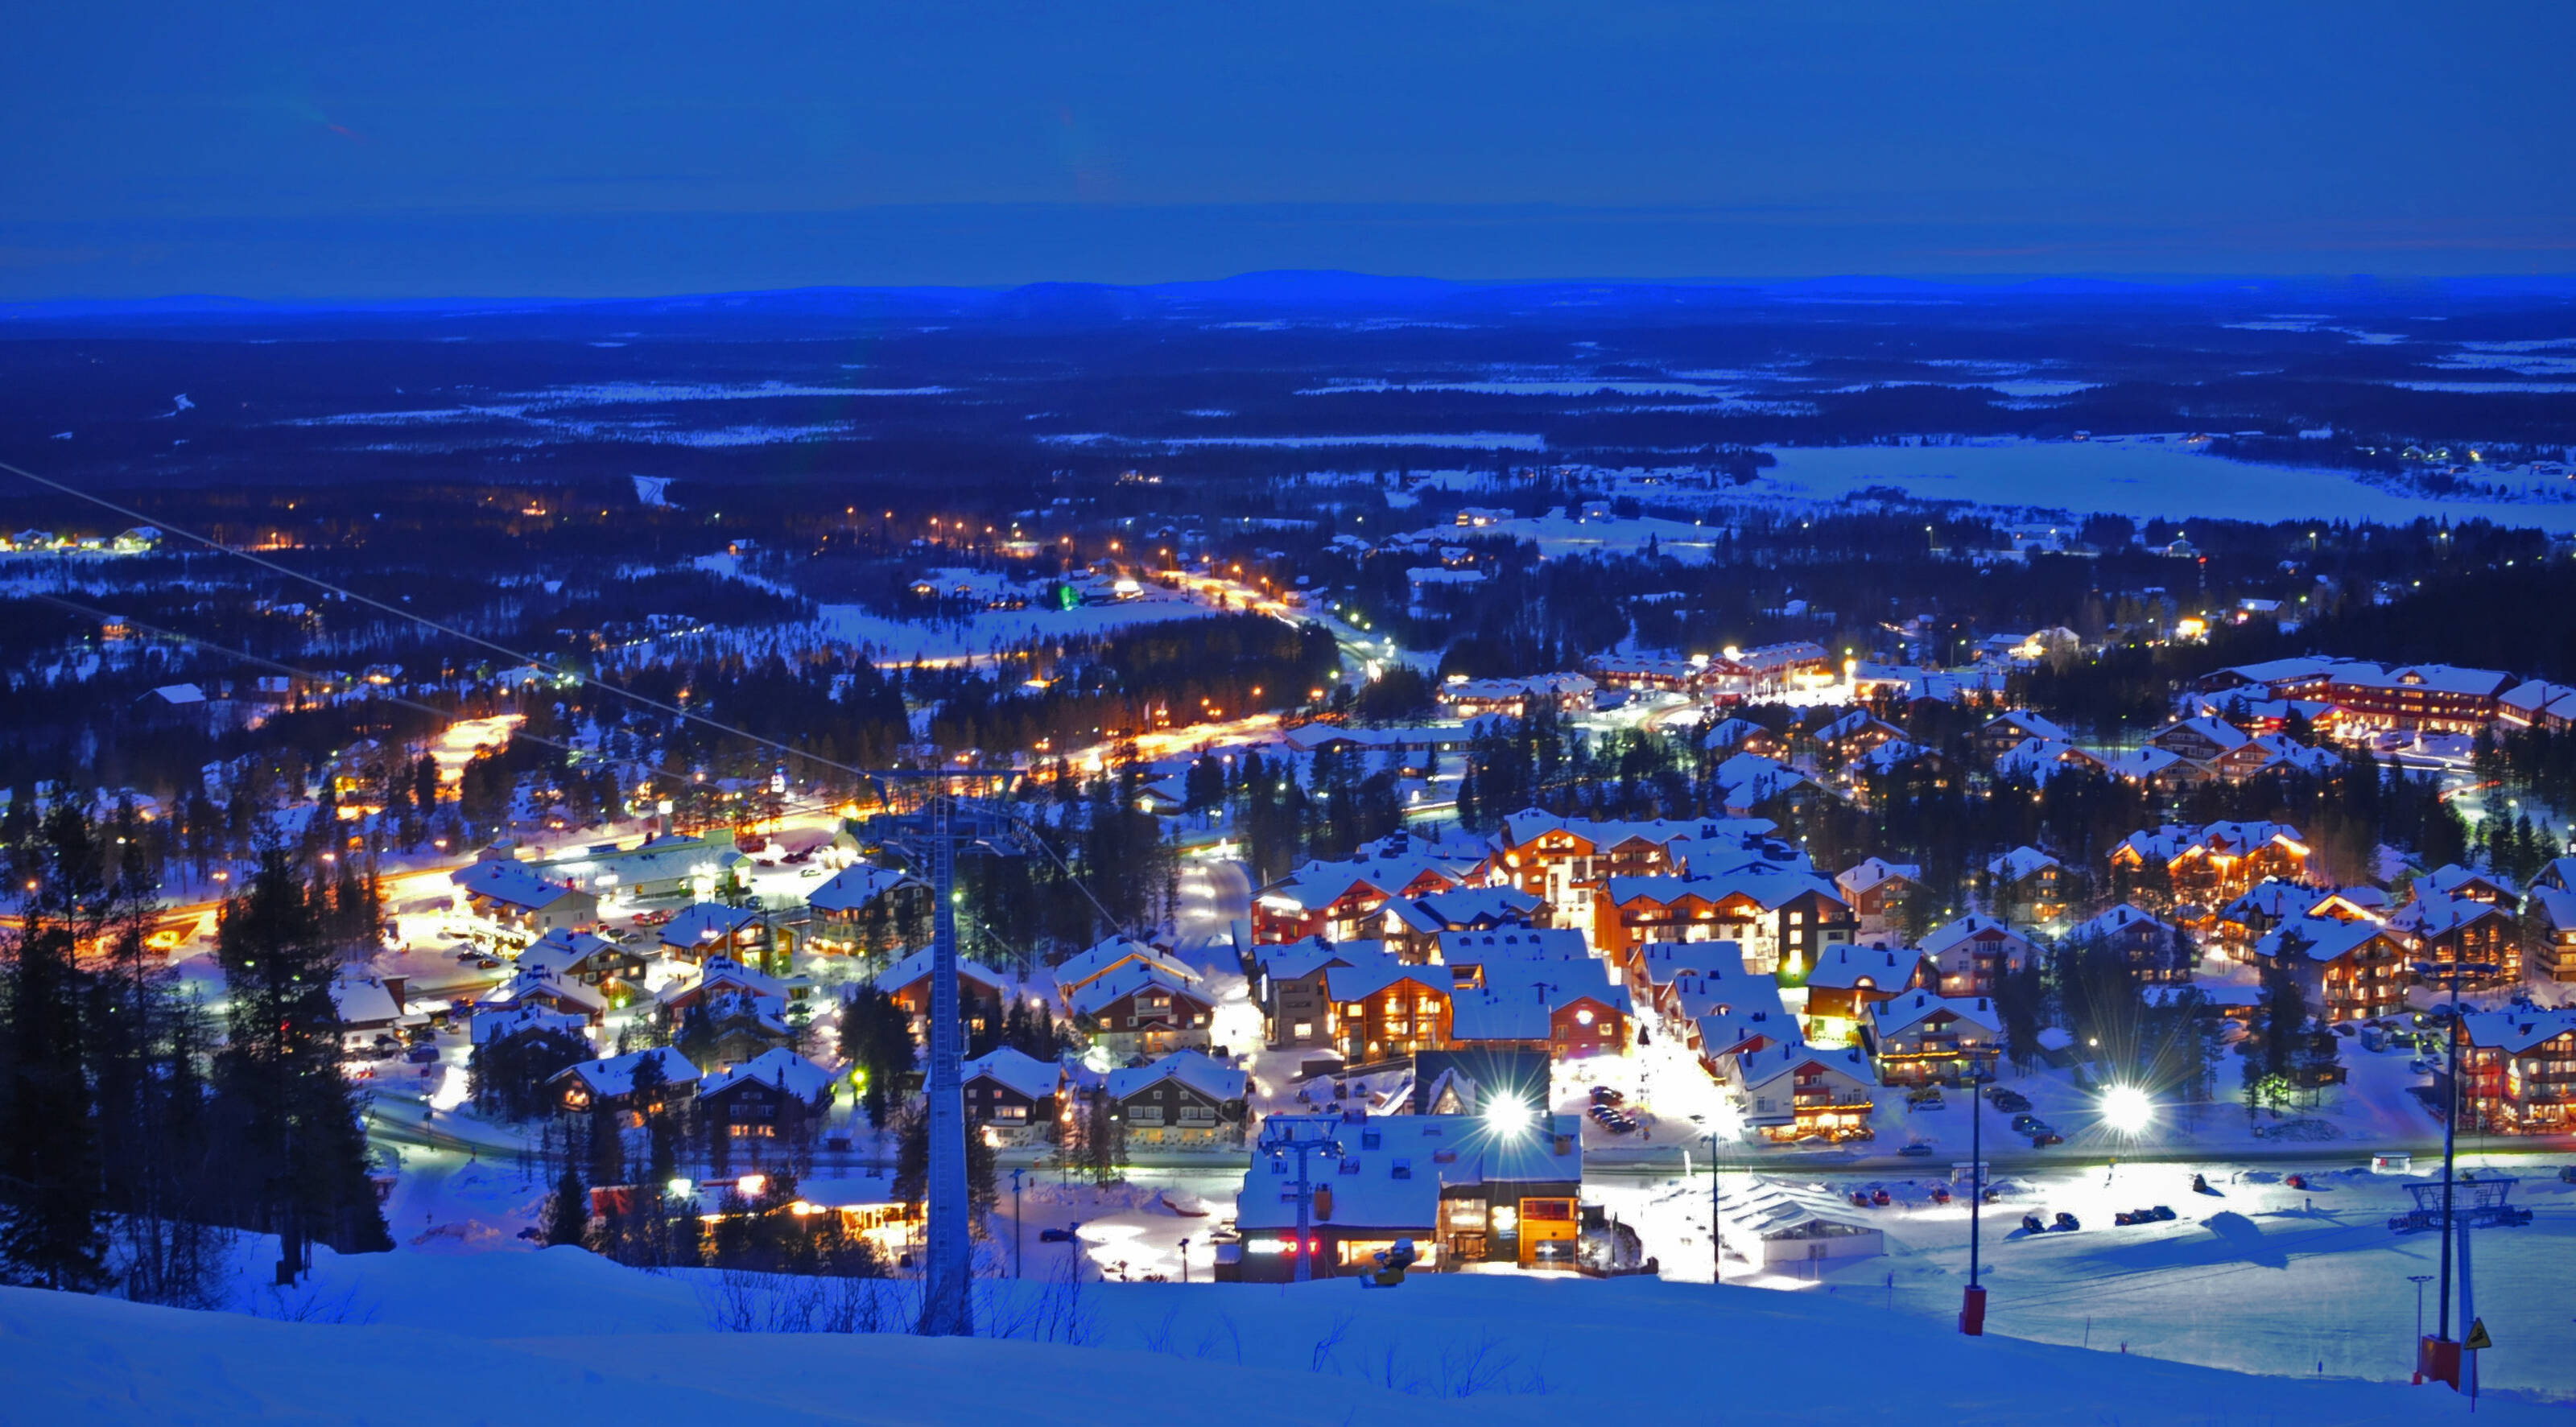 An aerial view of the square full of aurora cabins in the middle of snow-covered forest.